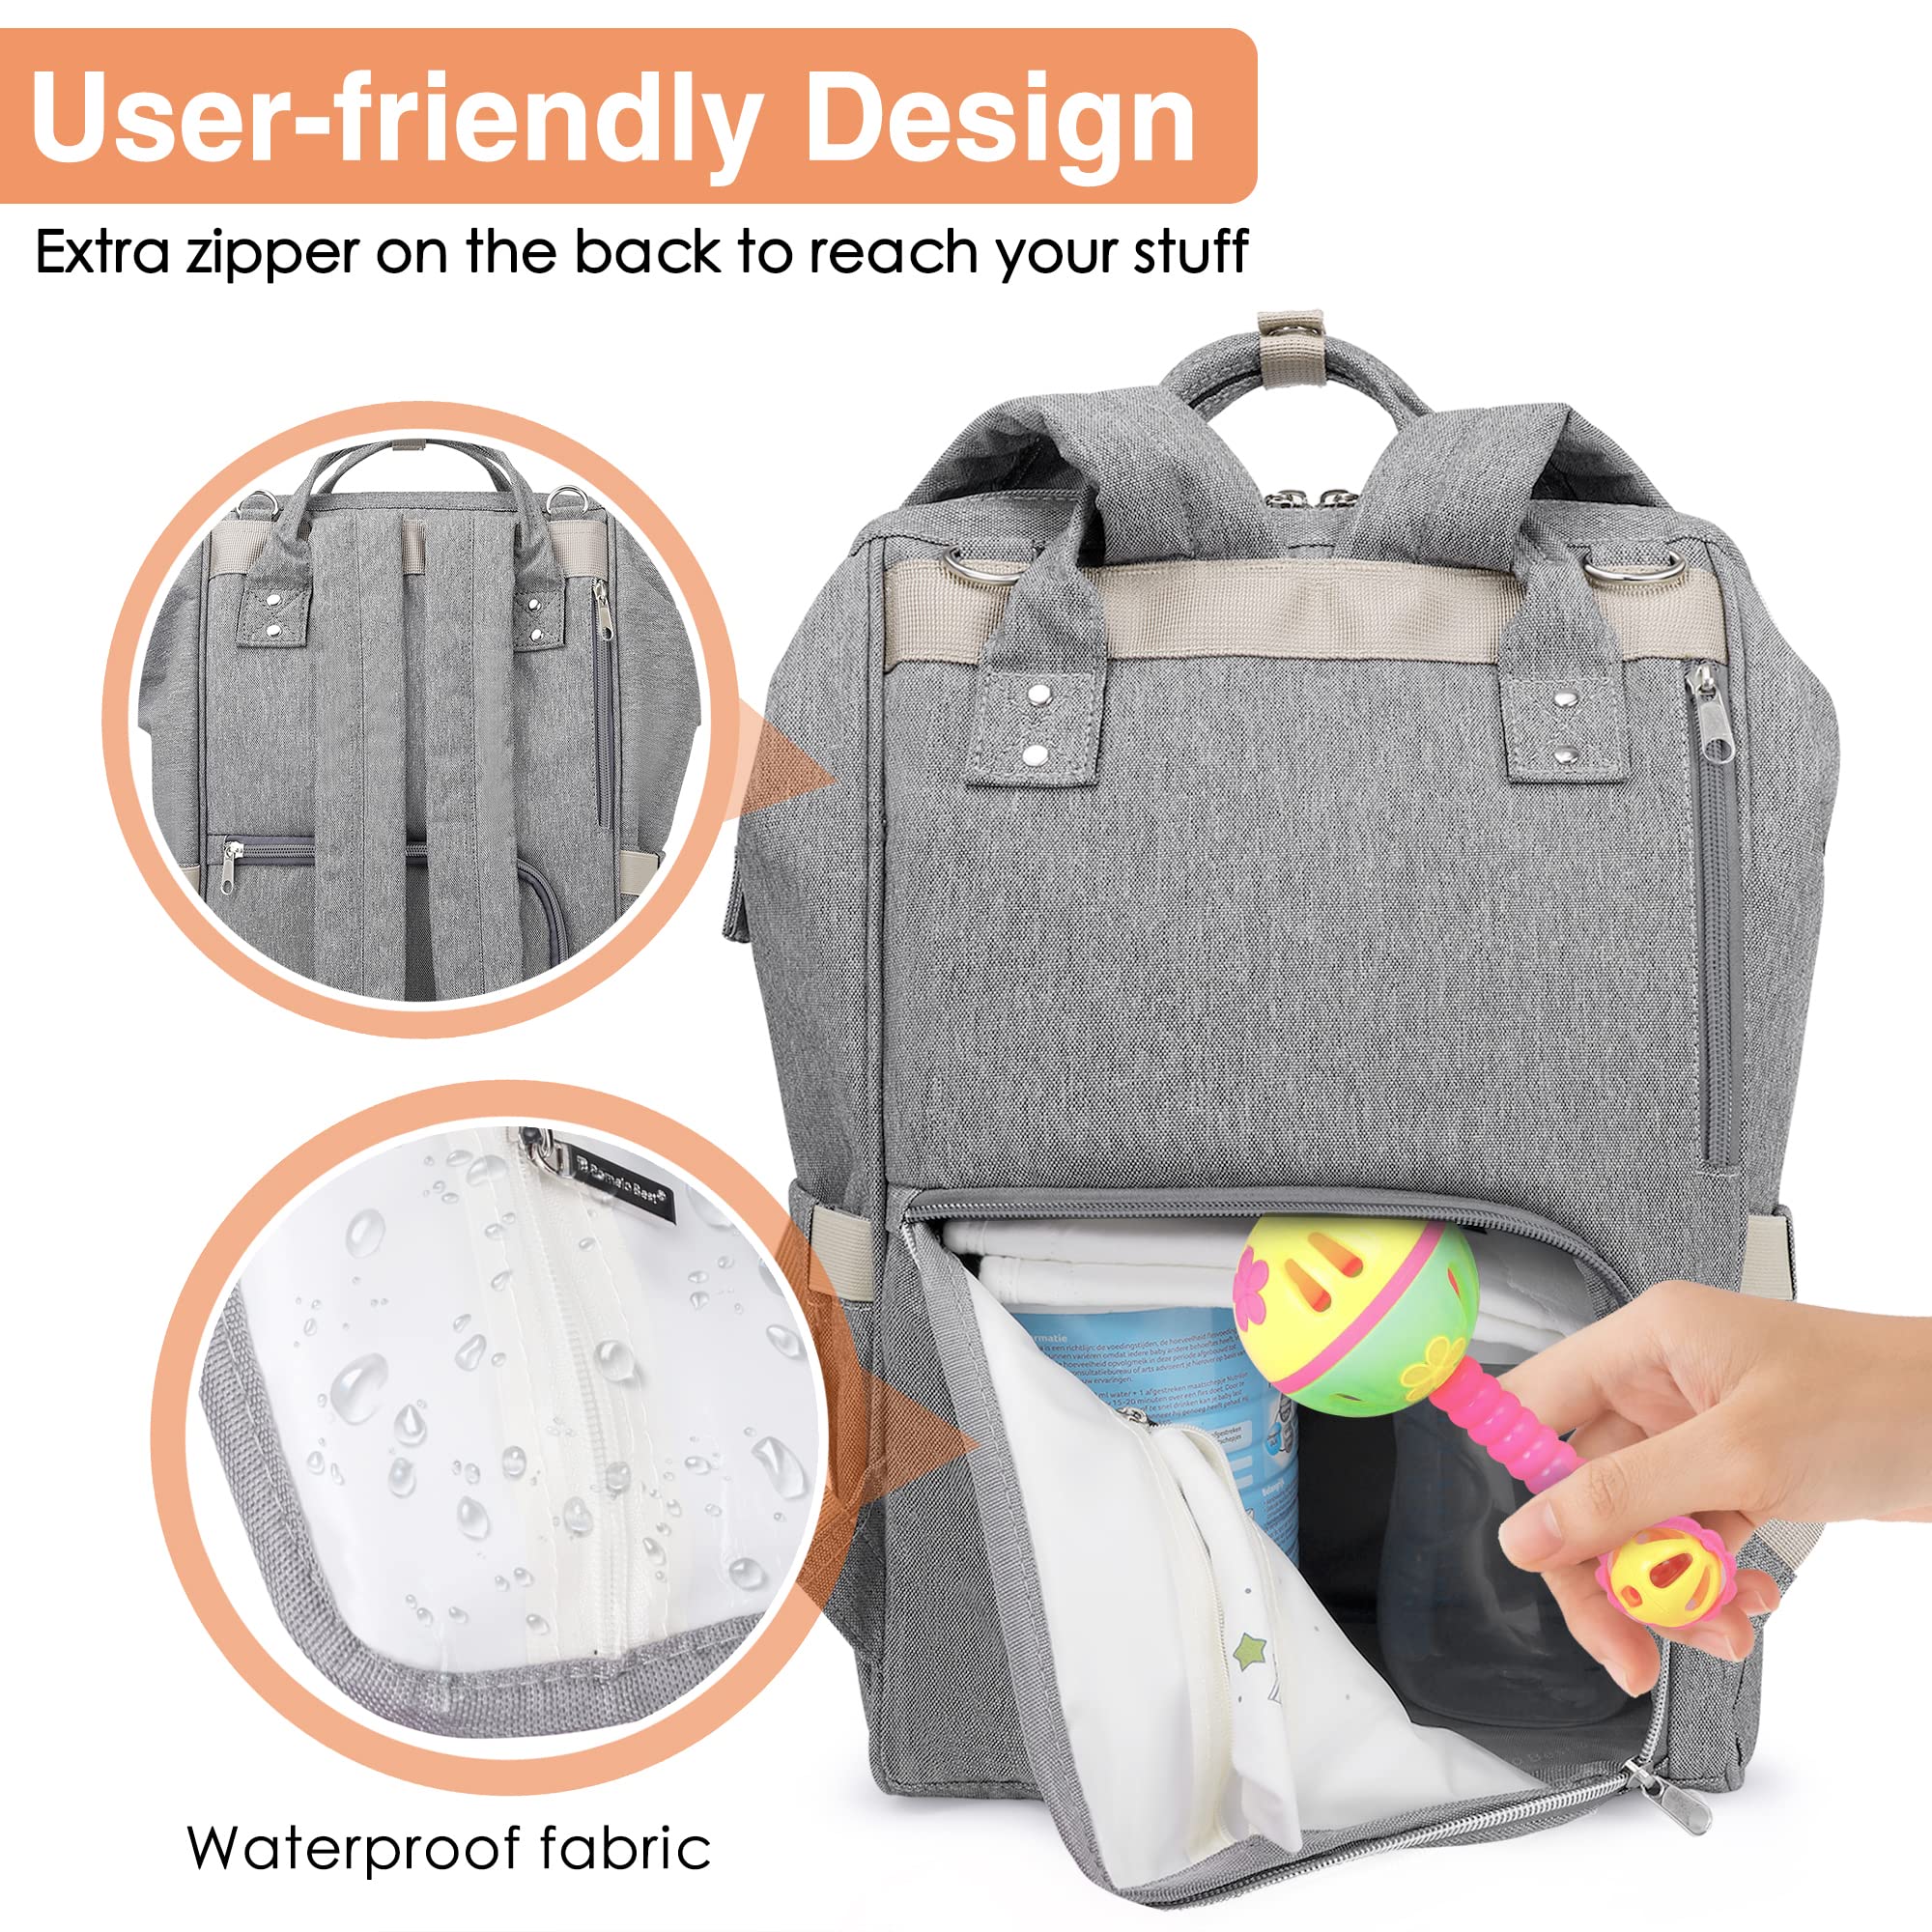 Pomelo Best Diaper Bag Backpack, Multifunction Large Quilted Baby Bag Travel Changing Bags Unisex Waterproof Stylish Diaper Back pack with Stroller Straps Portable Changing Pad Baby Bag for Dad/Mom